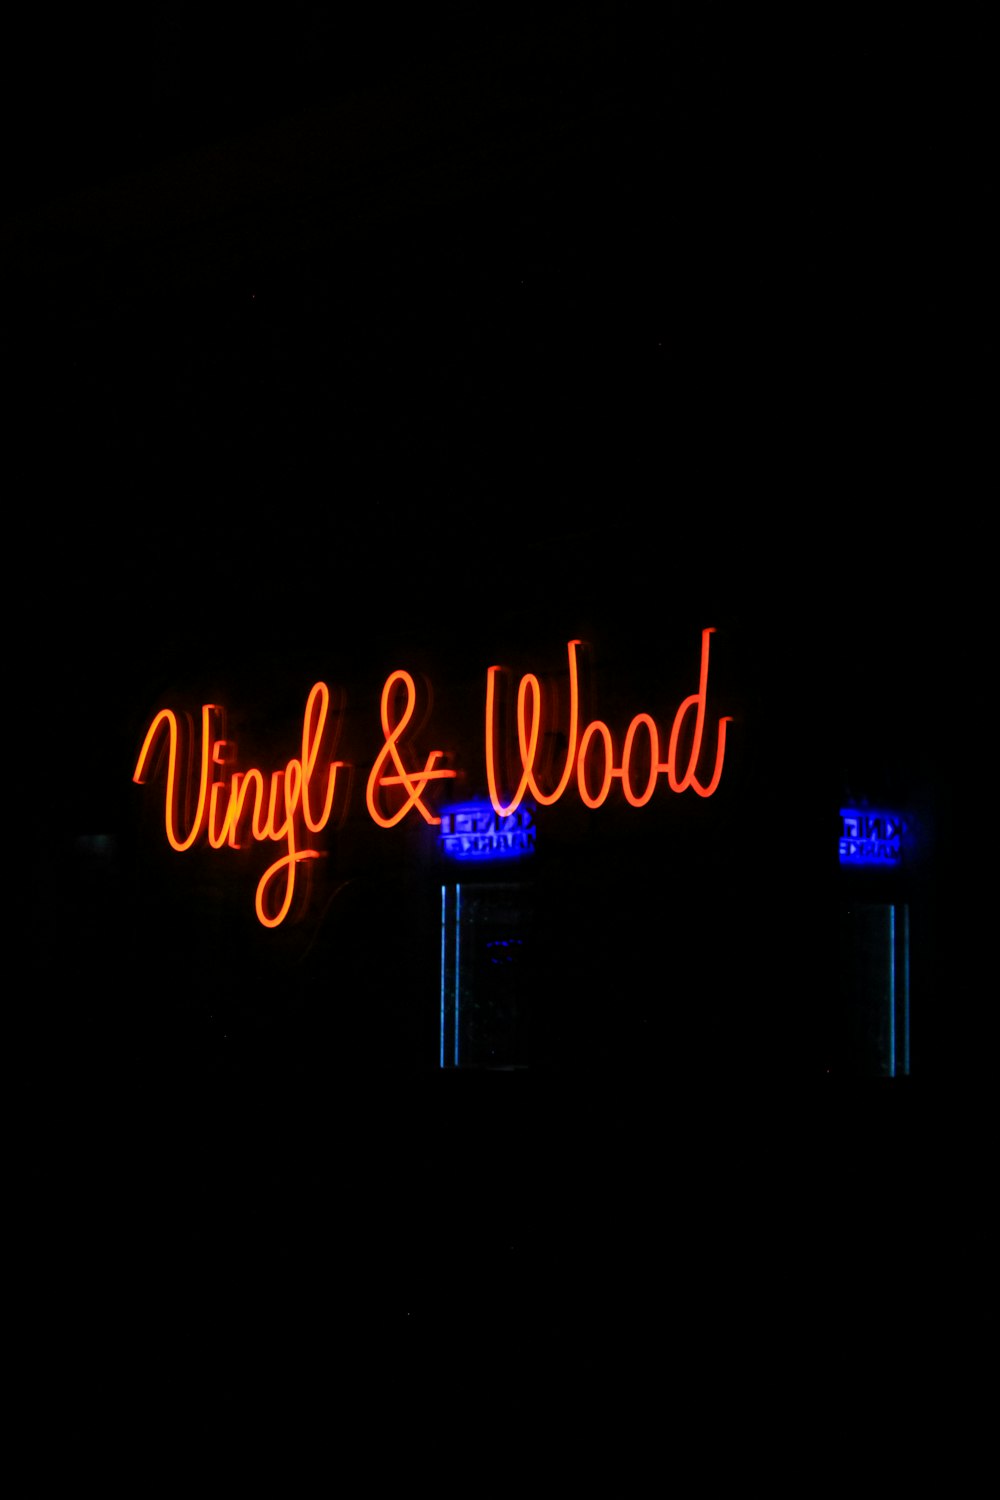 a neon sign in the dark with a dark background